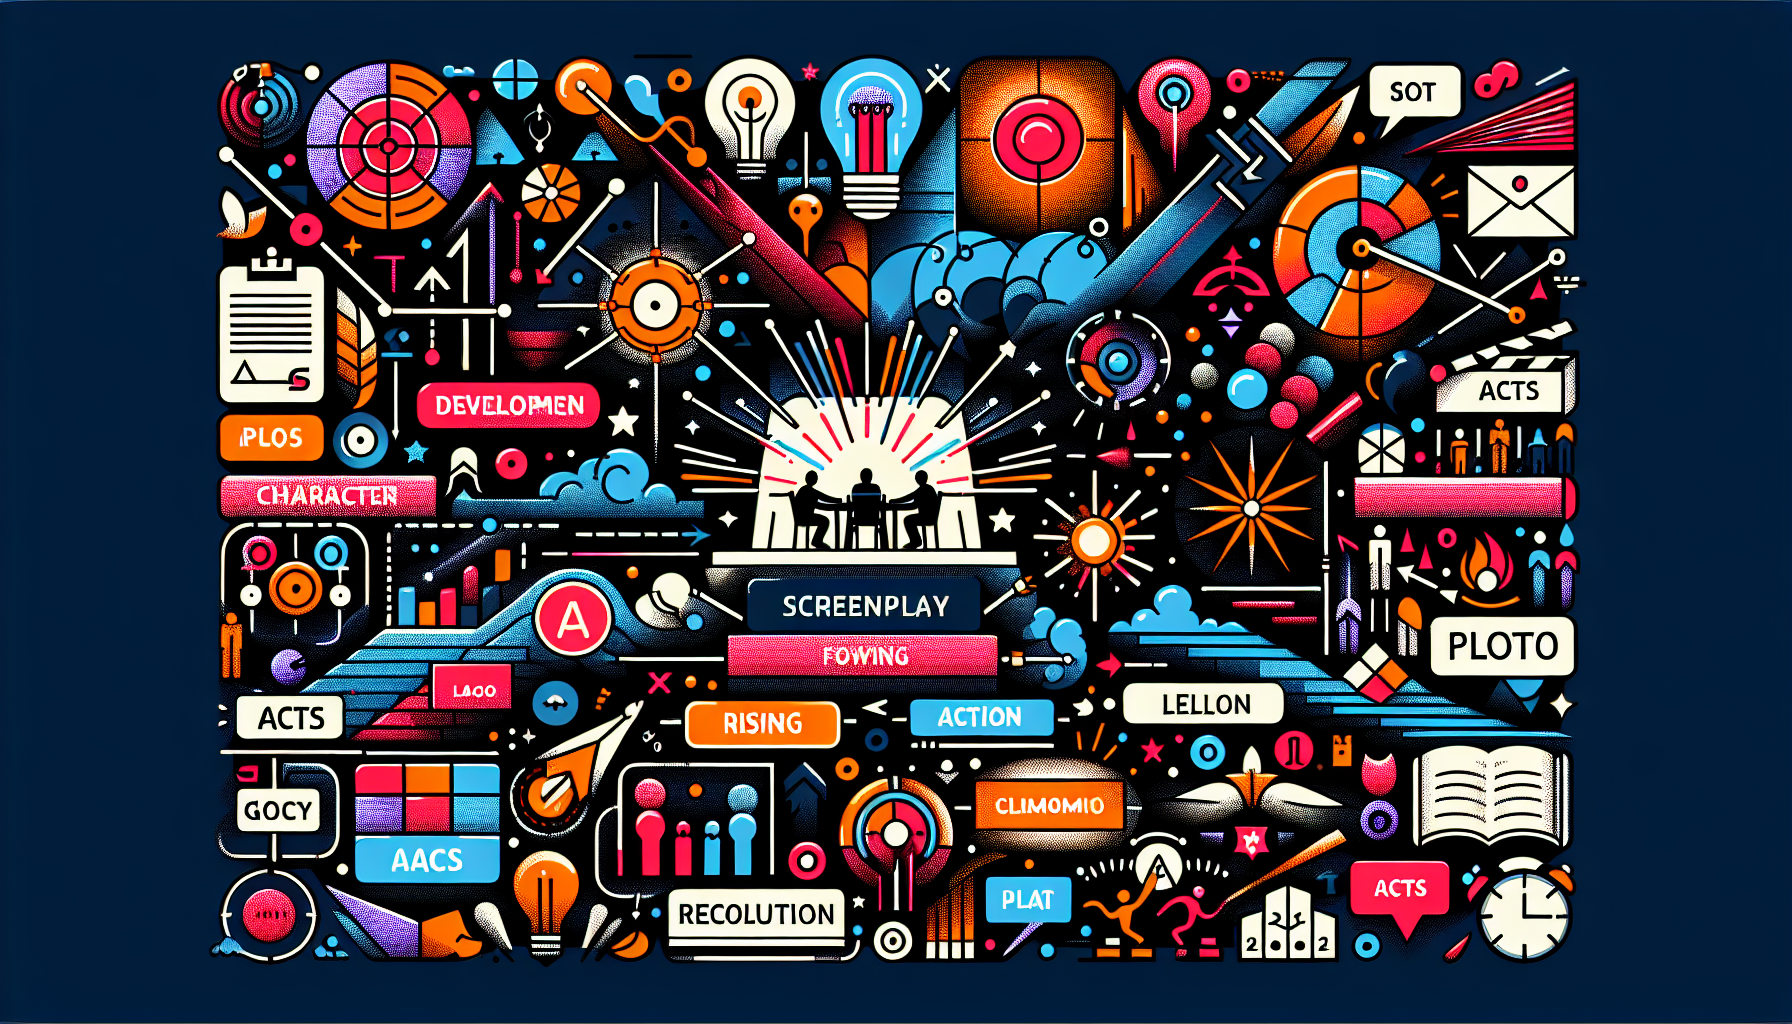 Illustration that visually interprets the key elements of a screenplay. Capture the idea in a modern and colorful style, reflecting components such as character development, plot structure, and dialogue without using any textual elements. Include symbolizations for acts, rising action, climax, falling action, and resolution, all portrayed in a visually innovative and engaging manner.